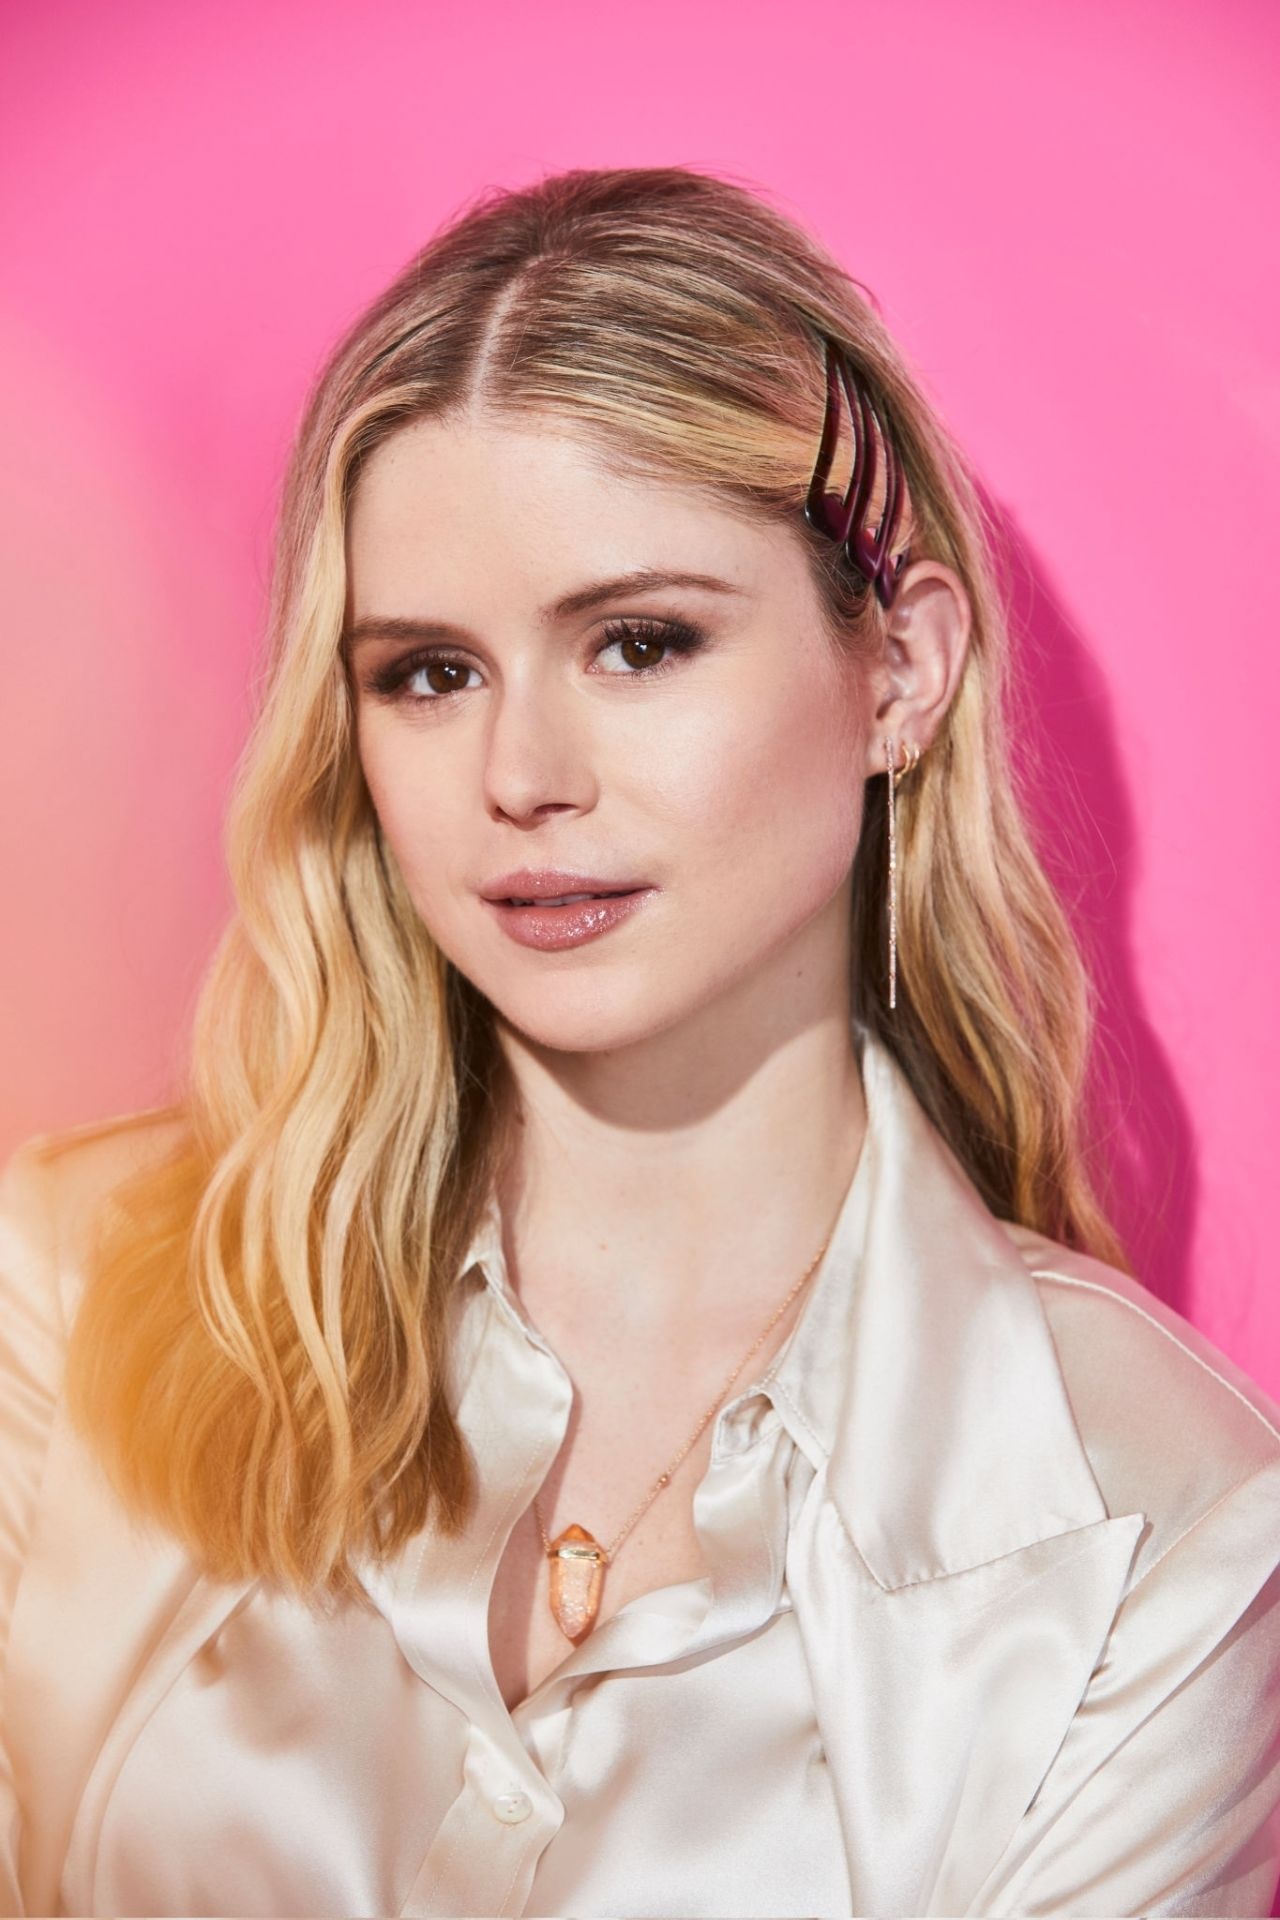 Erin Moriarty: An American actress, Best known for her role as Starlight in the Amazon Prime Video series The Boys. 1280x1920 HD Wallpaper.